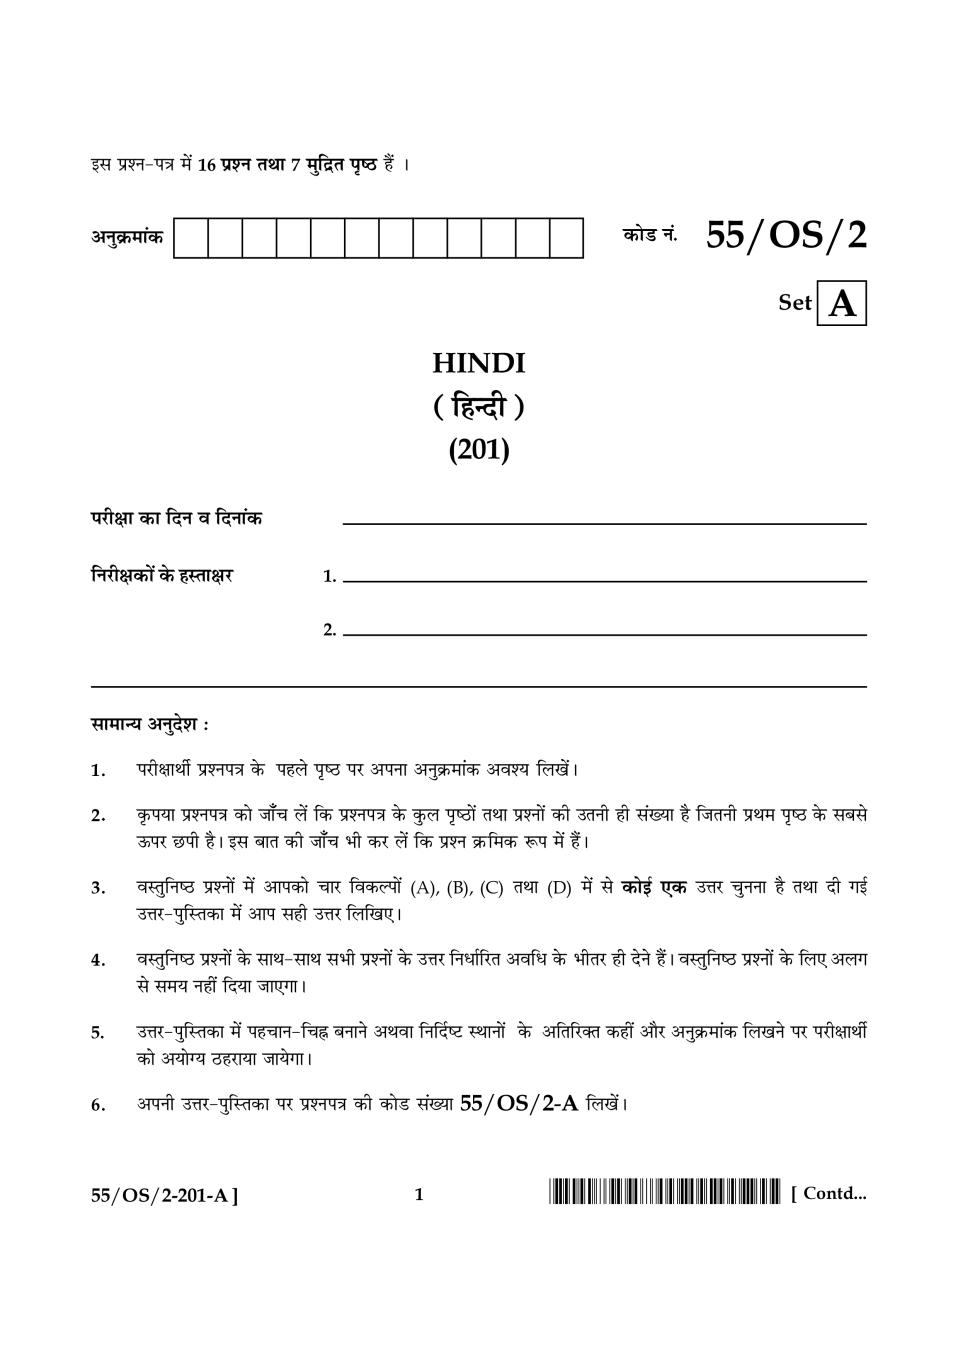 NIOS Class 10 Question Paper Oct 2017 - Hindi - Page 1